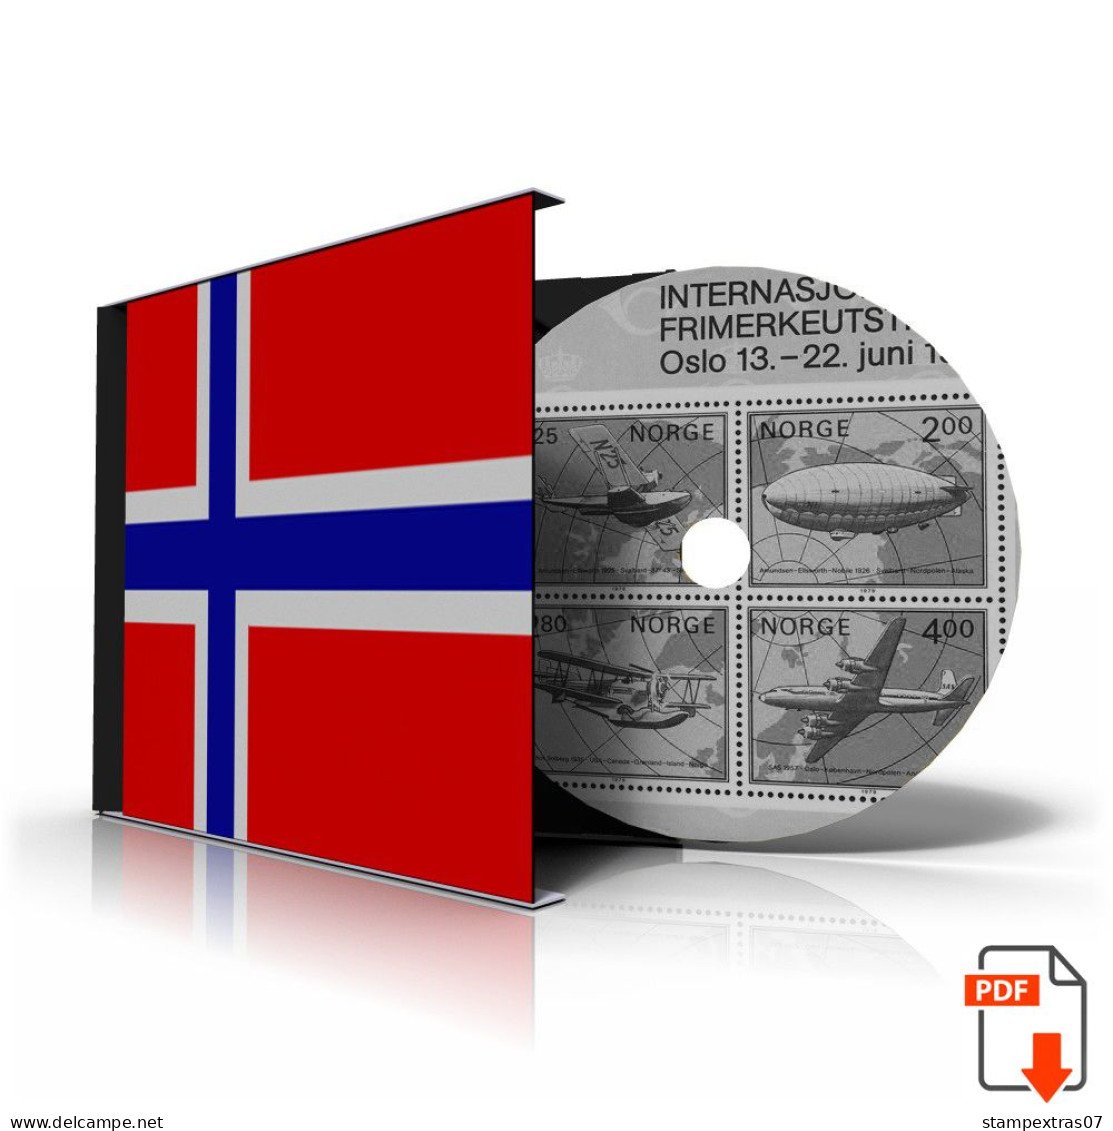 NORWAY 1855-2010 STAMP ALBUM PAGES (183 B&w Illustrated Pages) - Inglese